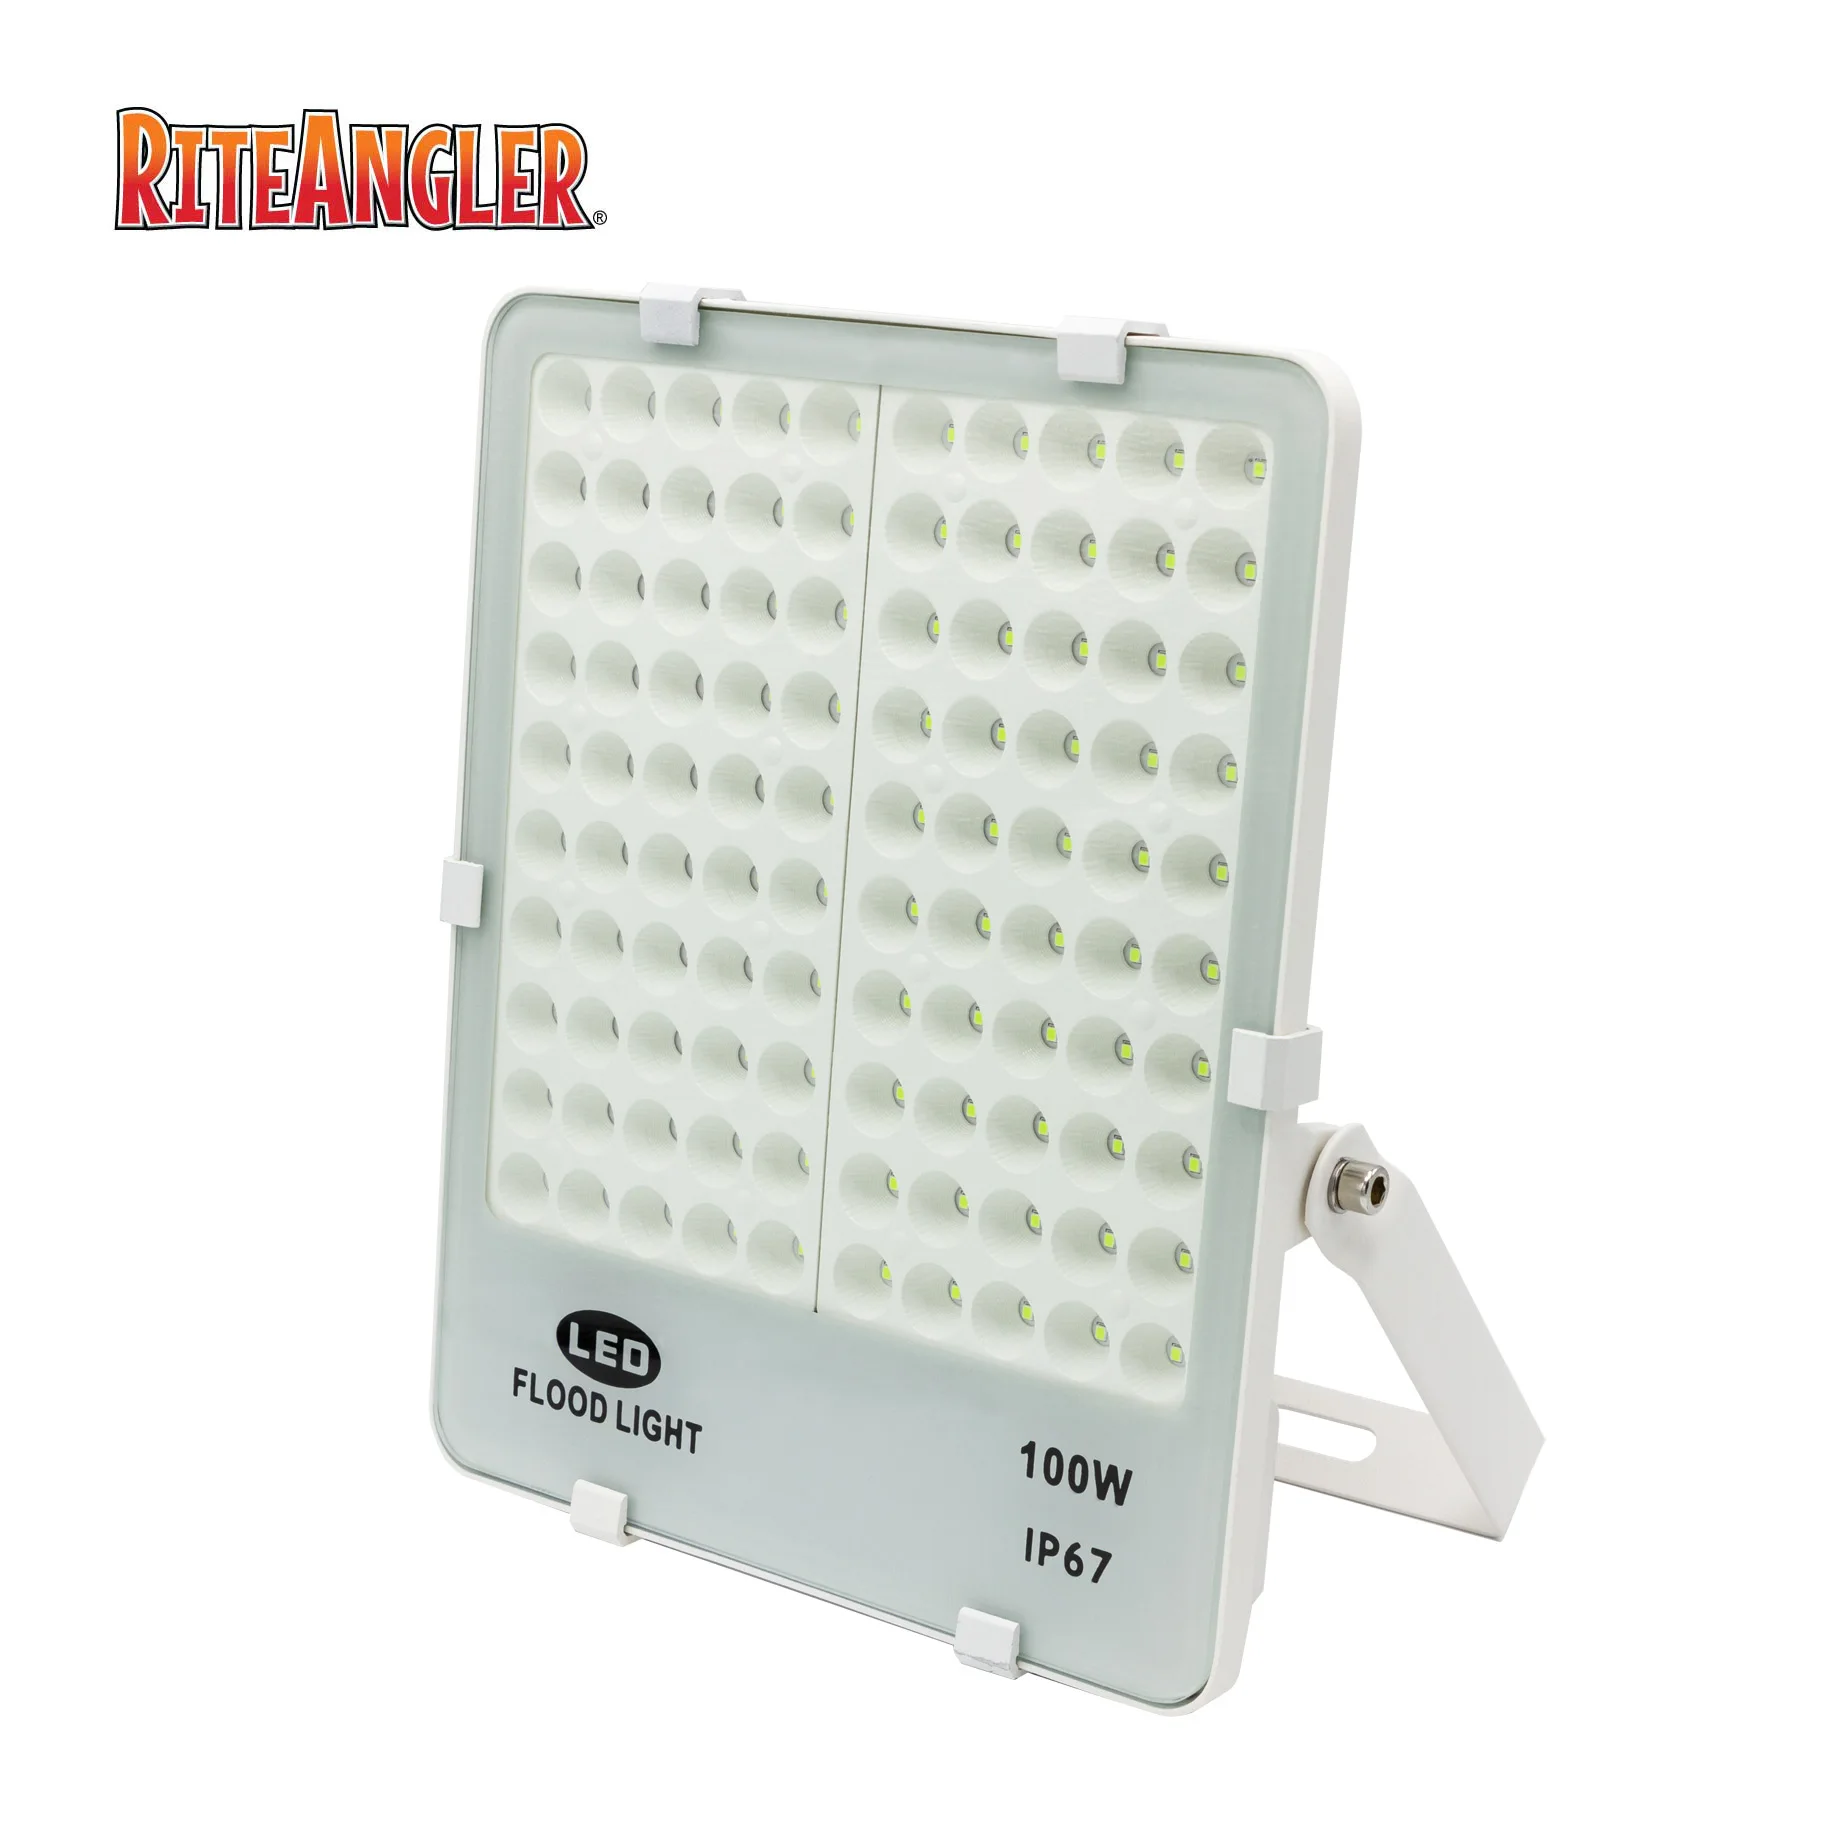 Green-Blazer Fish and Game Green LED Floodlight, 120-degree beam angle, 110v, IP67 rating, Photoelectric Sensor Light Activated